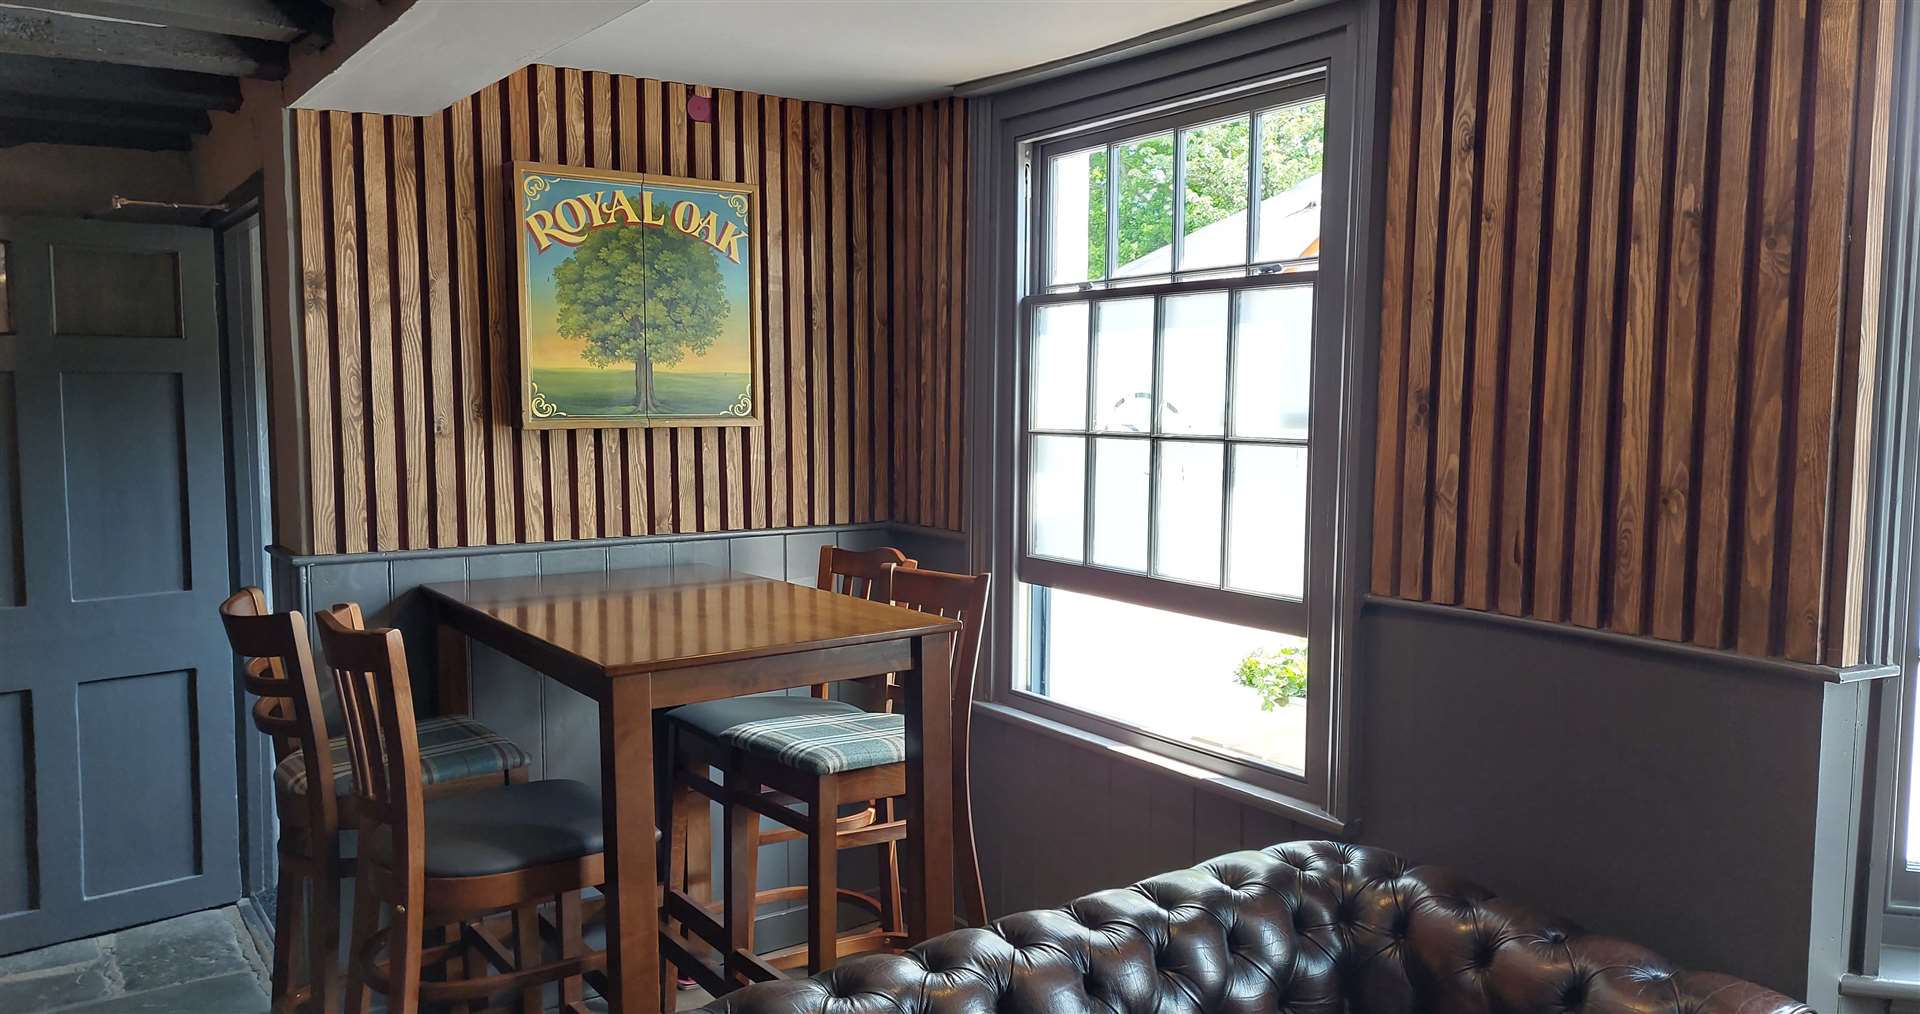 The Royal Oak in Mersham has reopened after a £150,000 revamp